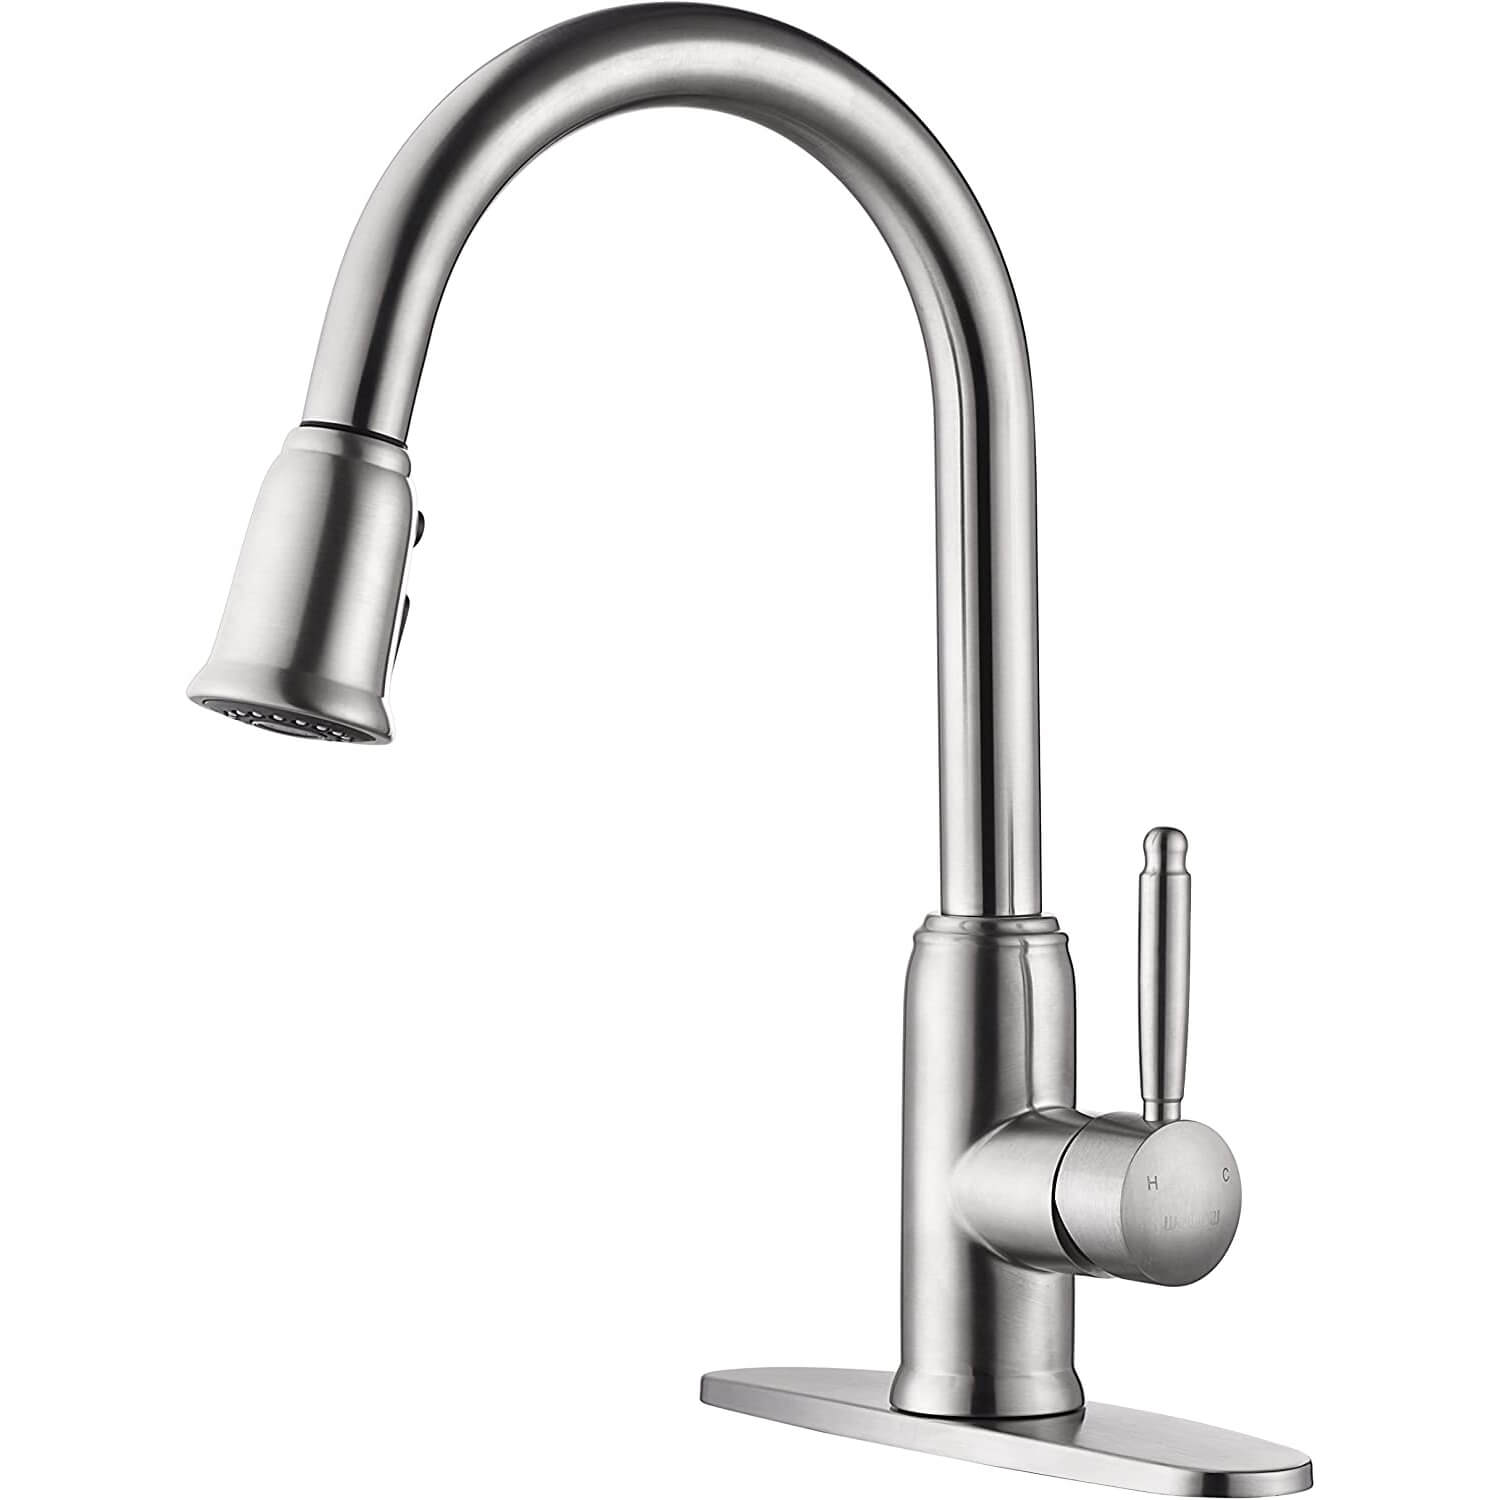 iVIGA Stainless Steel Kitchen Sink Faucet with Pull Down Sprayer, High Arc Brushed Nickel, 360 Degree Swivel, Single Handle